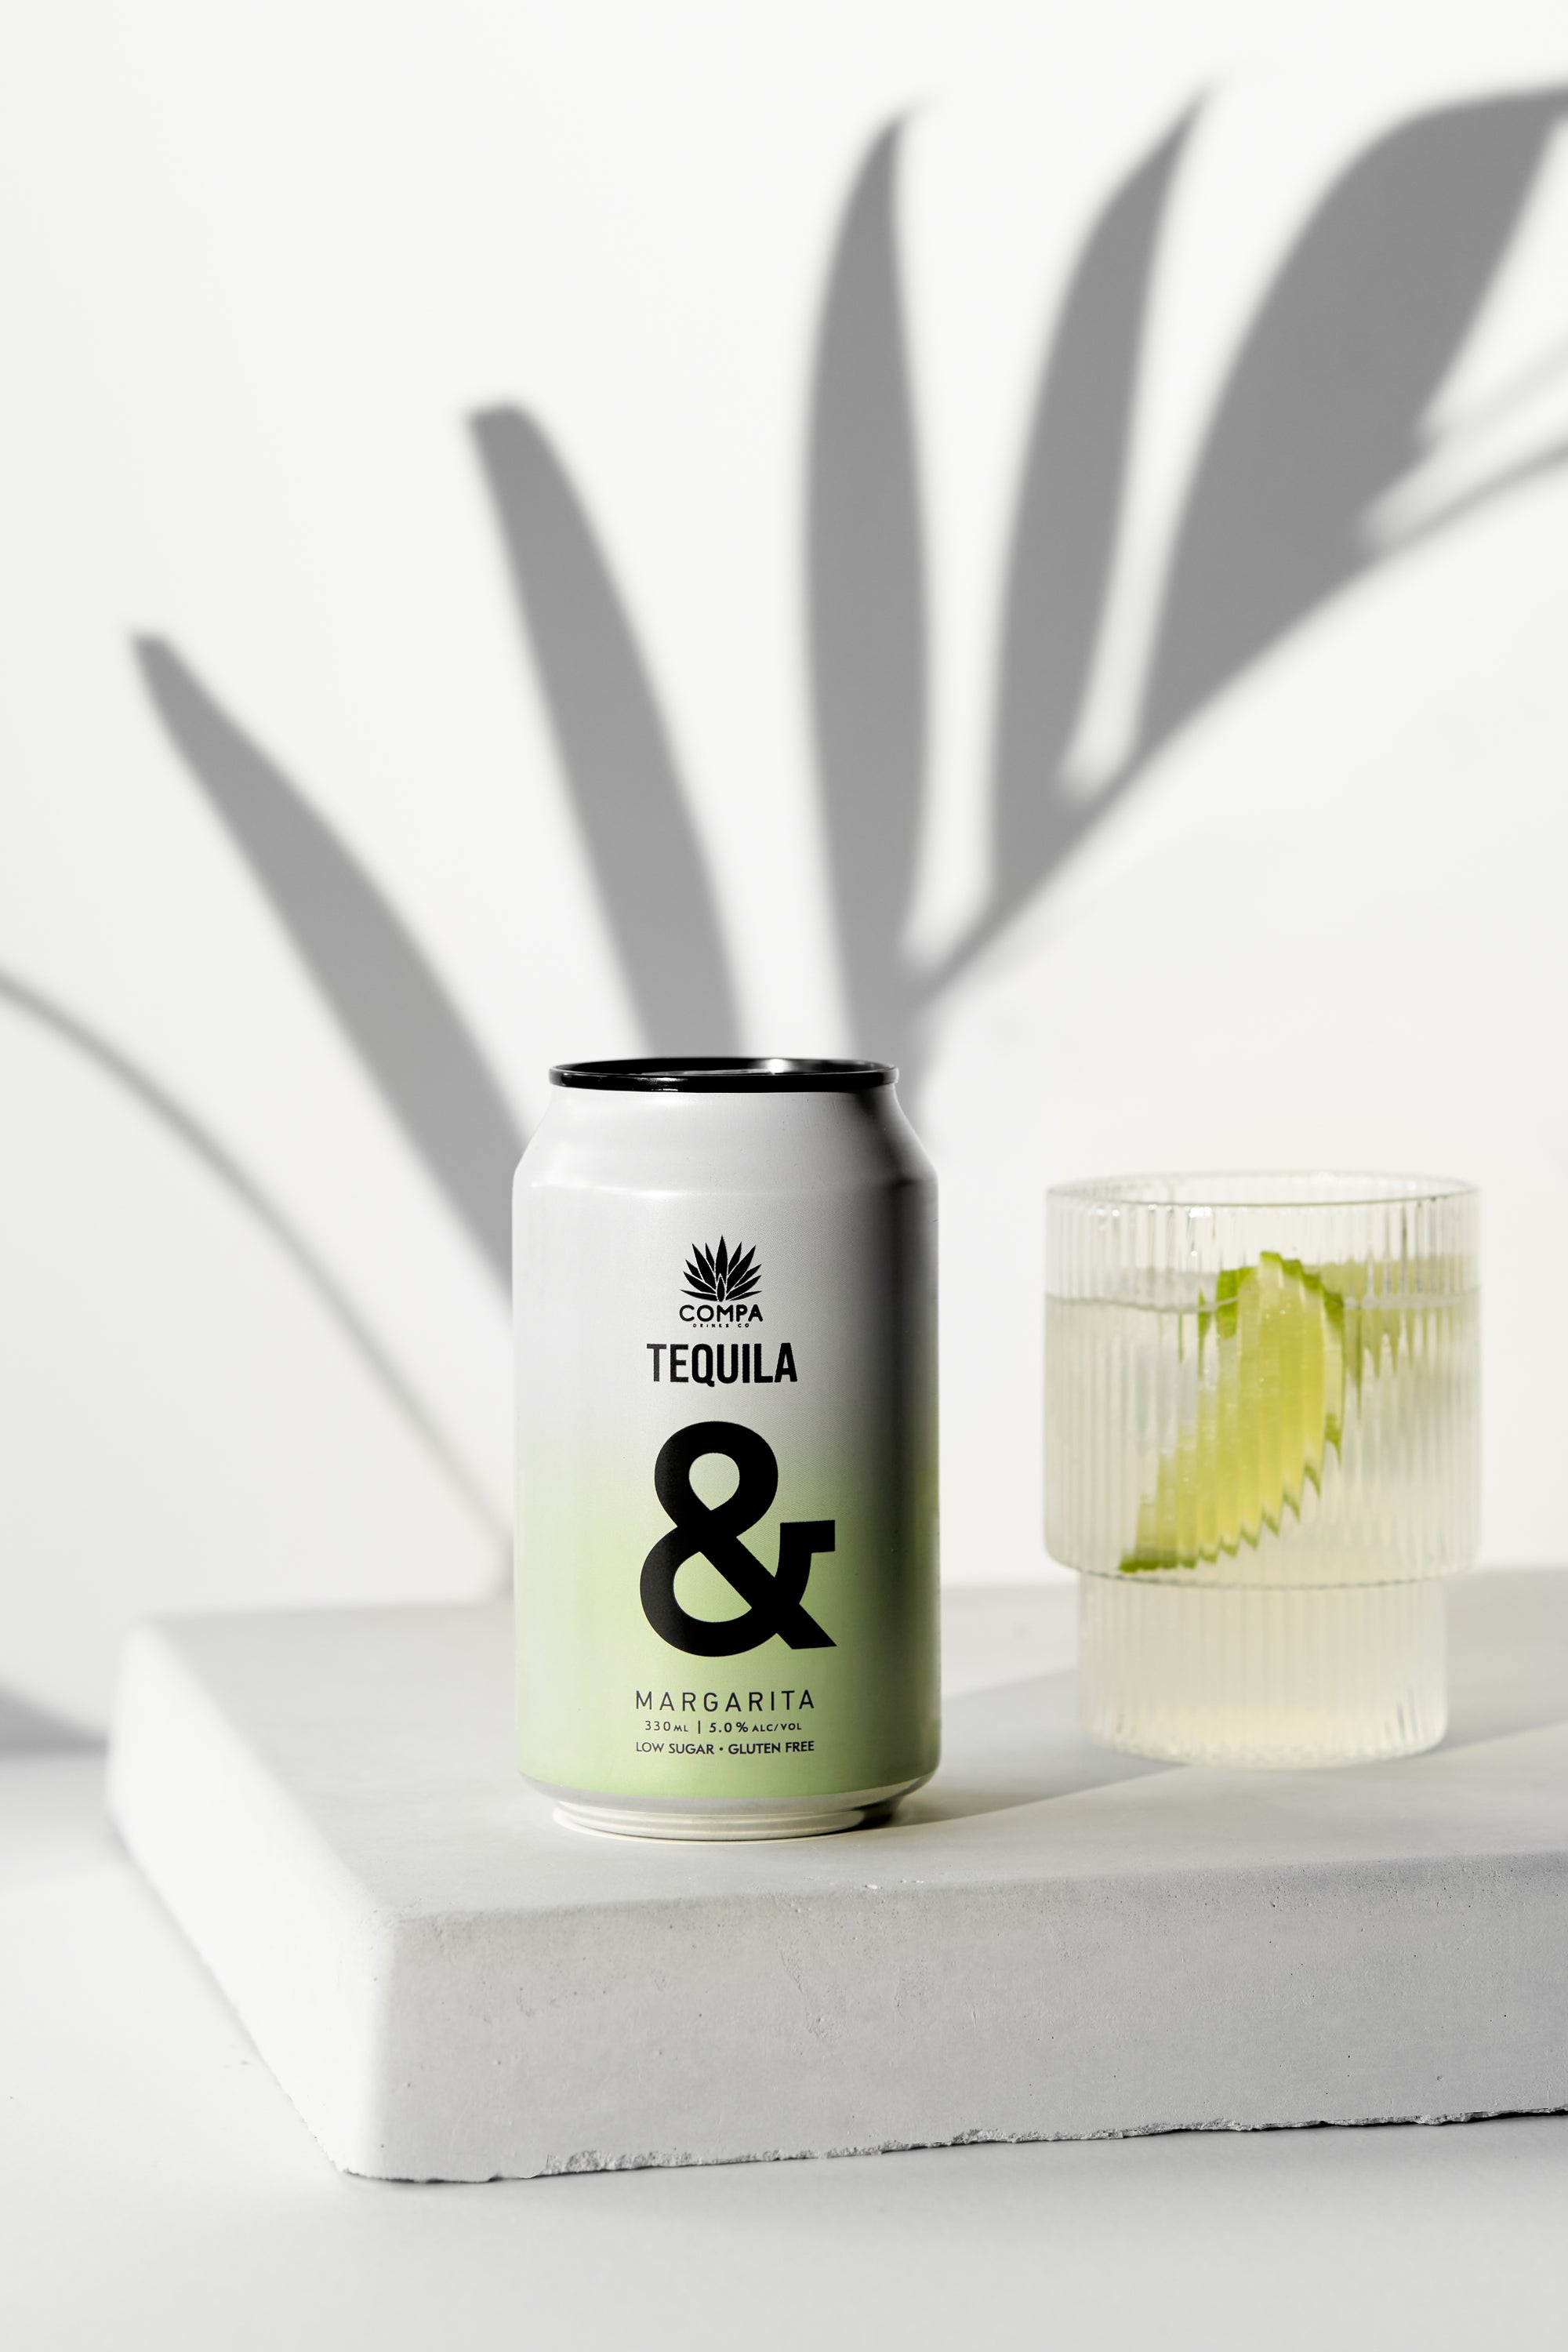 Tequila & Margarita Cans 5.0% (16 Pack)